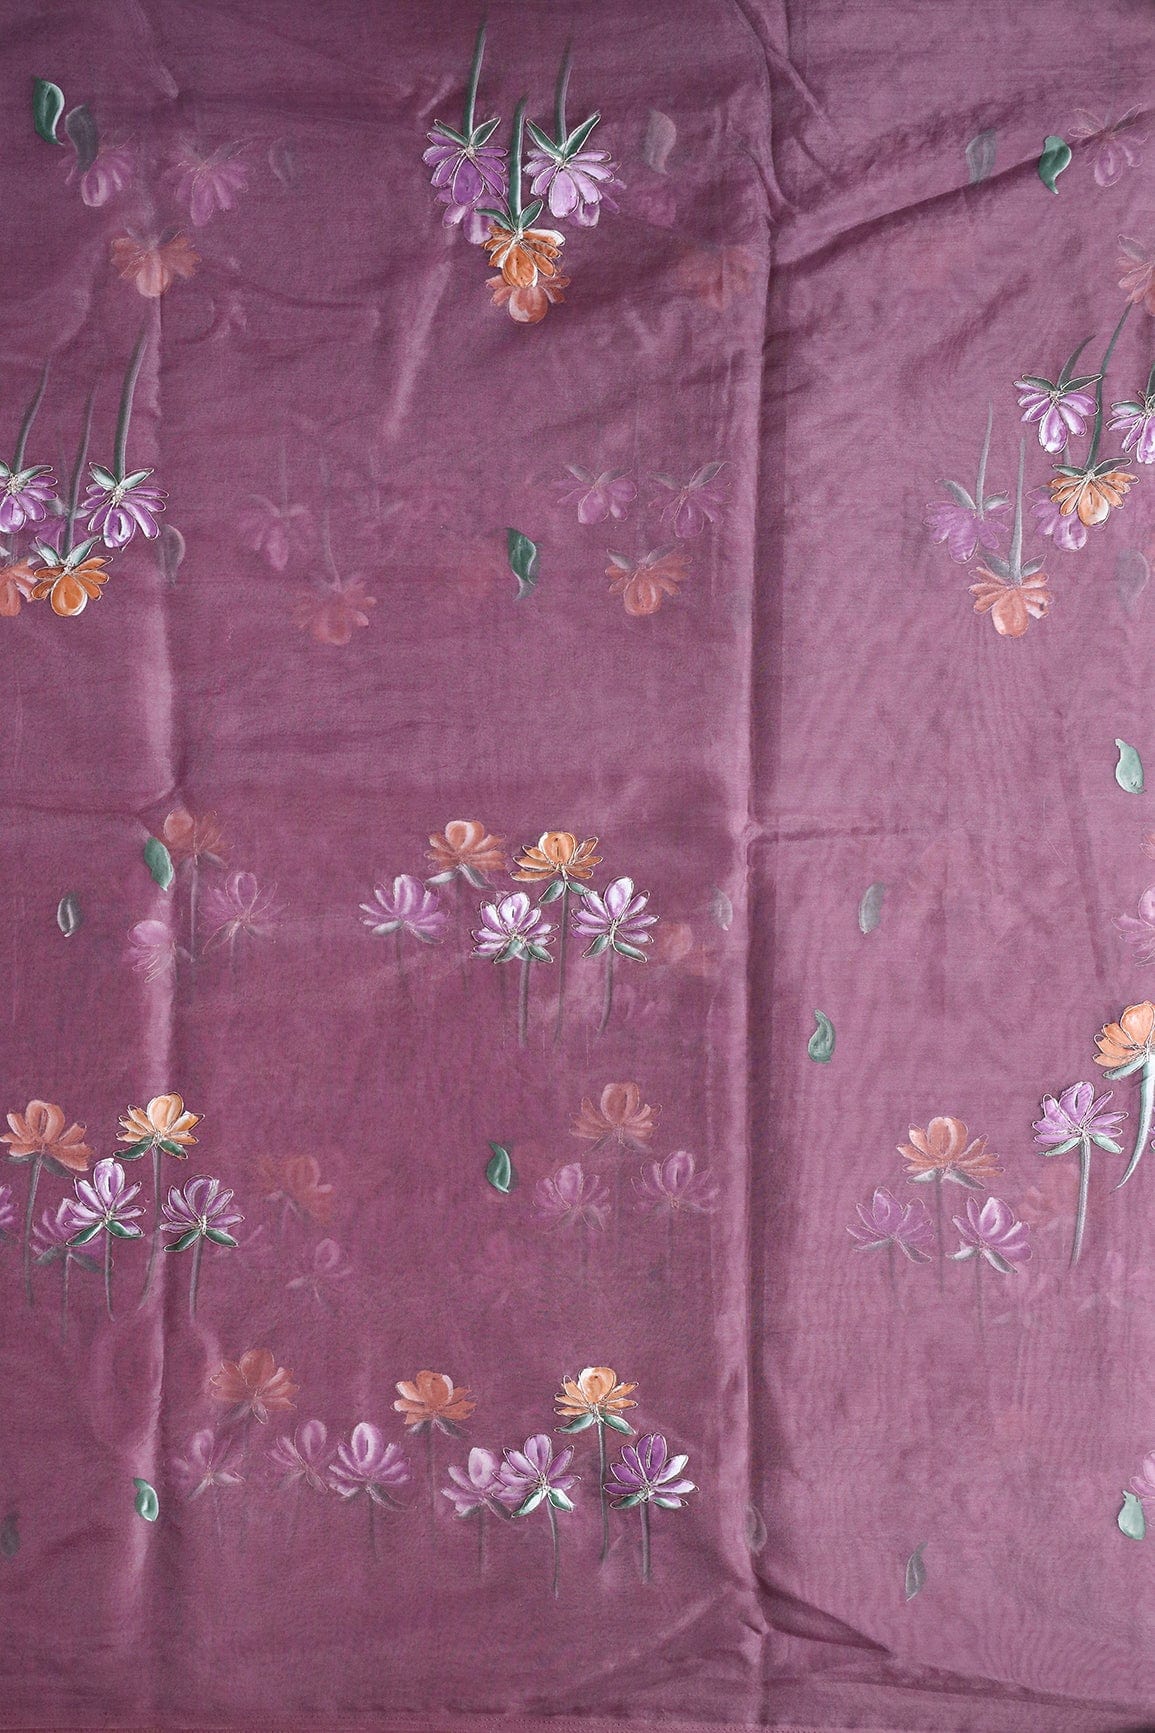 doeraa Embroidery Fabrics Elegant Floral Hand Painted With Embroidery Work On Lavender Organza Fabric